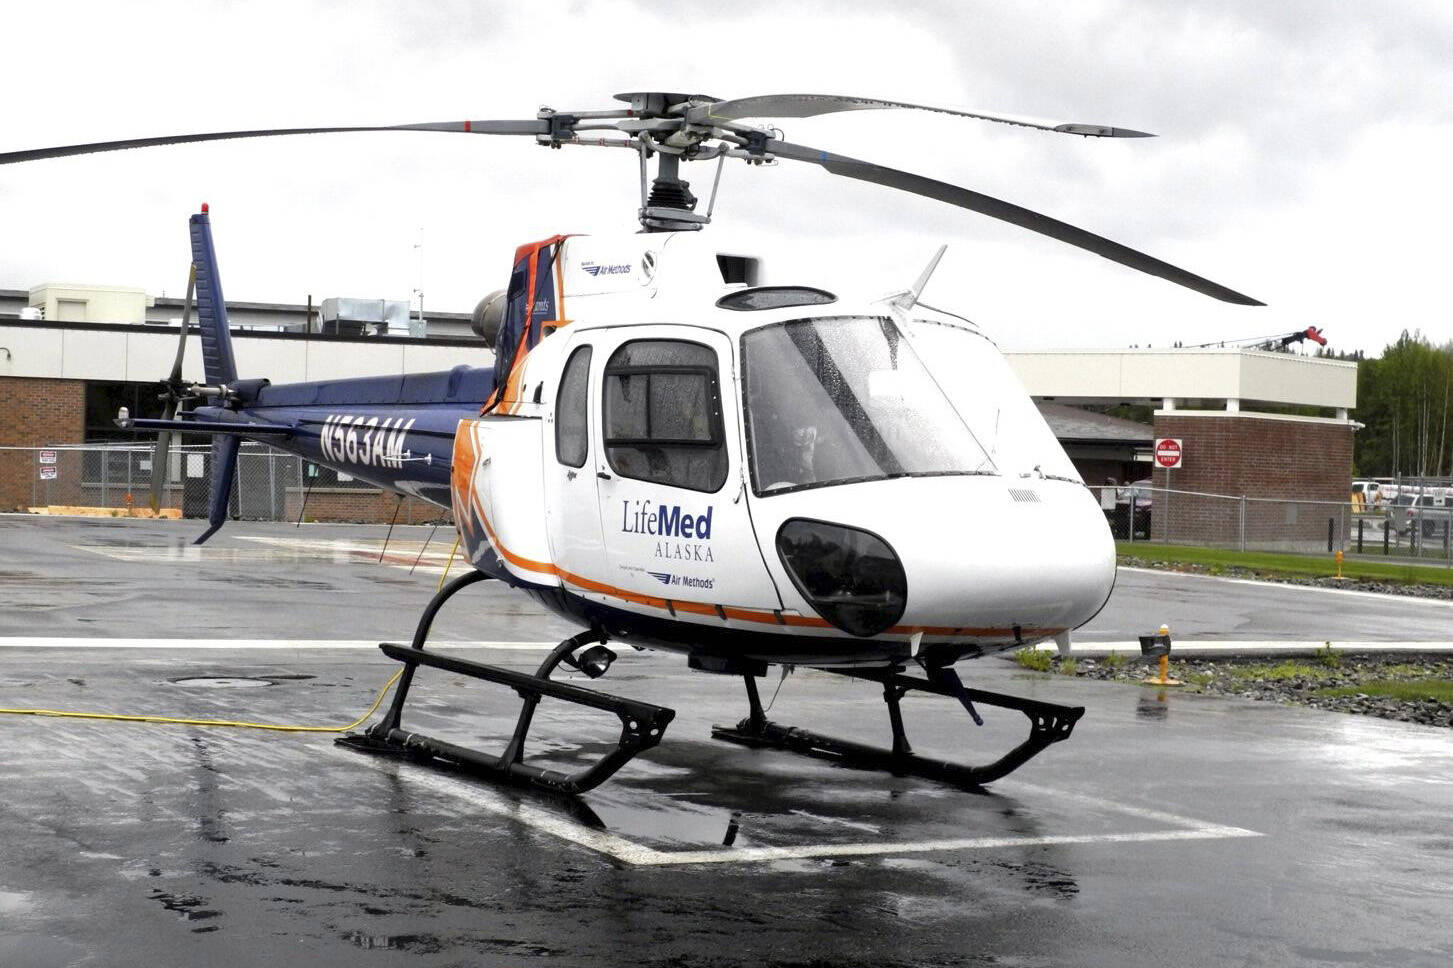 A LifeMed helicopter waits on June 10, 2014, at Central Peninsula Hospital in Soldotna, Alaska. The author took a medevac flight in May 2013 in a similar helicopter. (Photo by Michael Armstrong/Homer News)